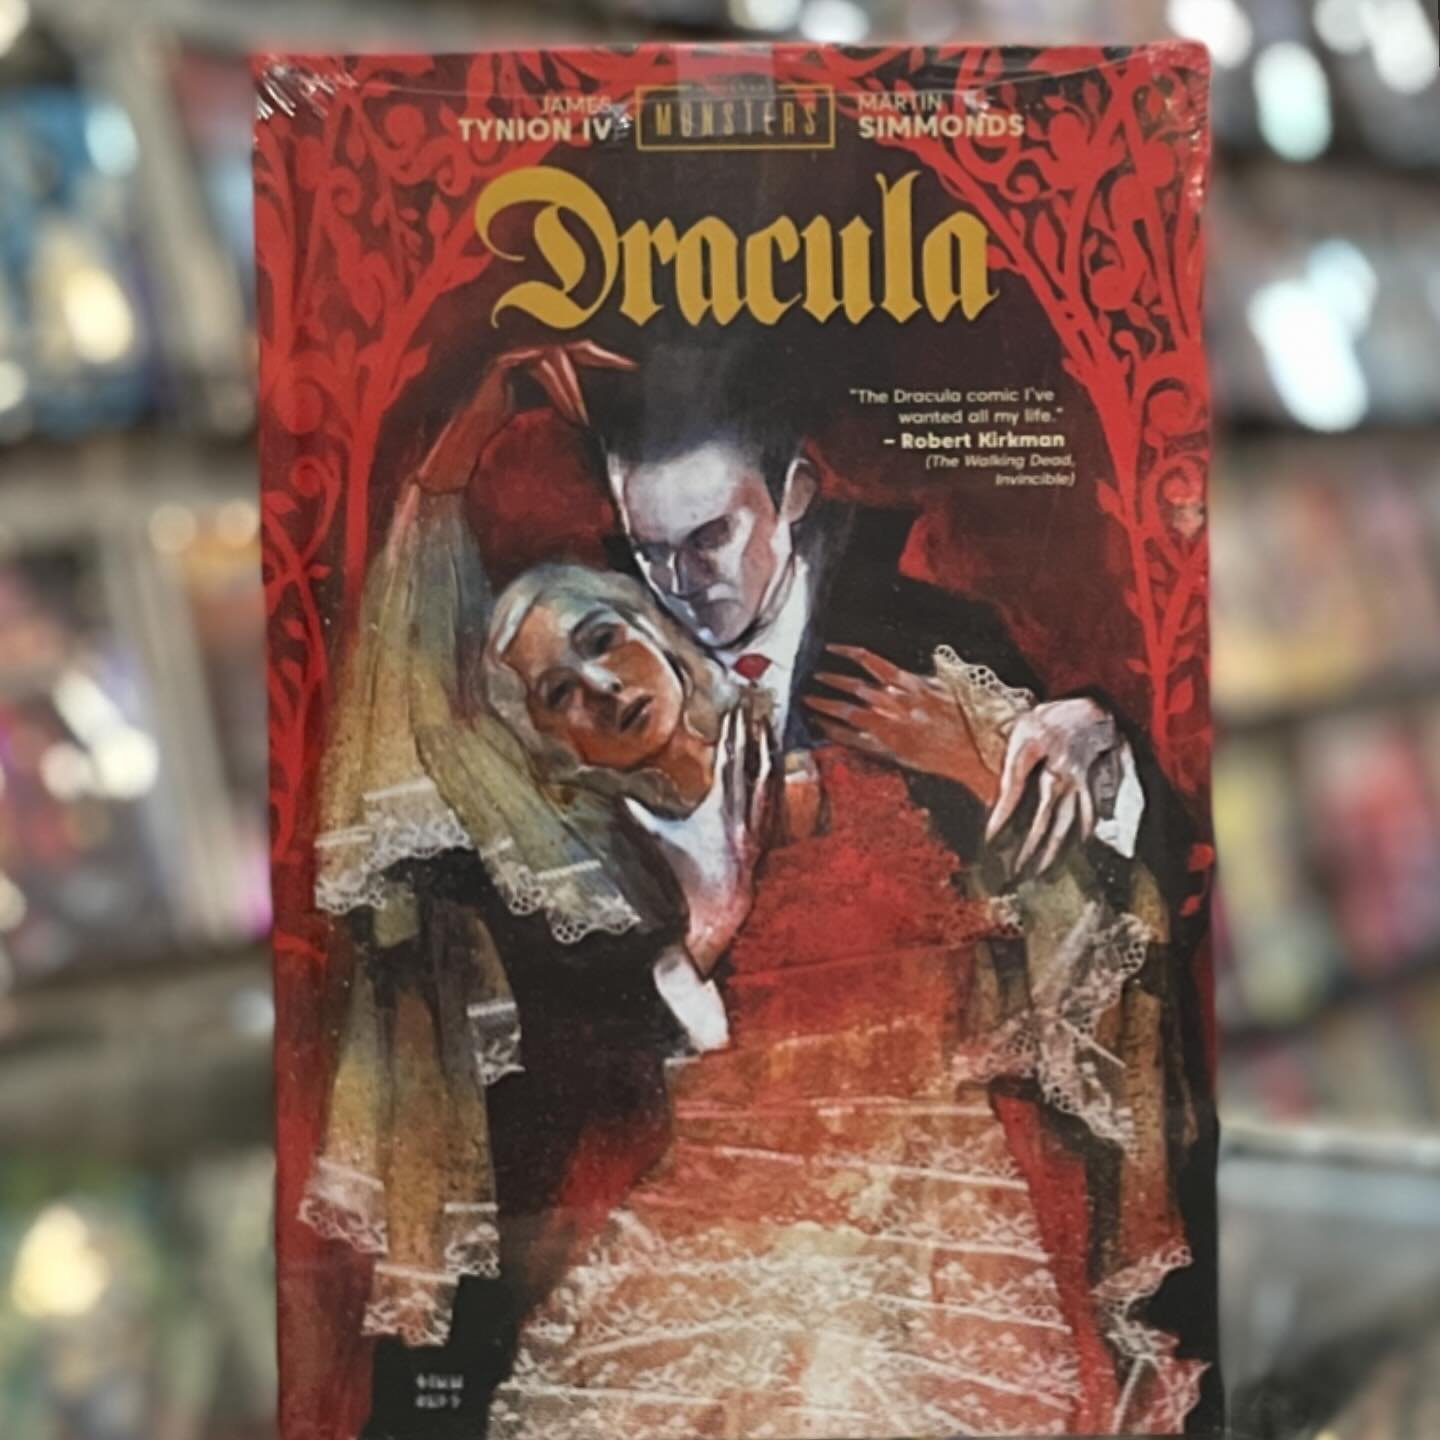 Happy New Comic Book Day! 
📚
When Dr. John Seward admits a strange new patient into his asylum, the madman tells stories of a demon who has taken residence next door. But as Dr. Seward attempts to apply logic to the impossible, his surrogate daughte